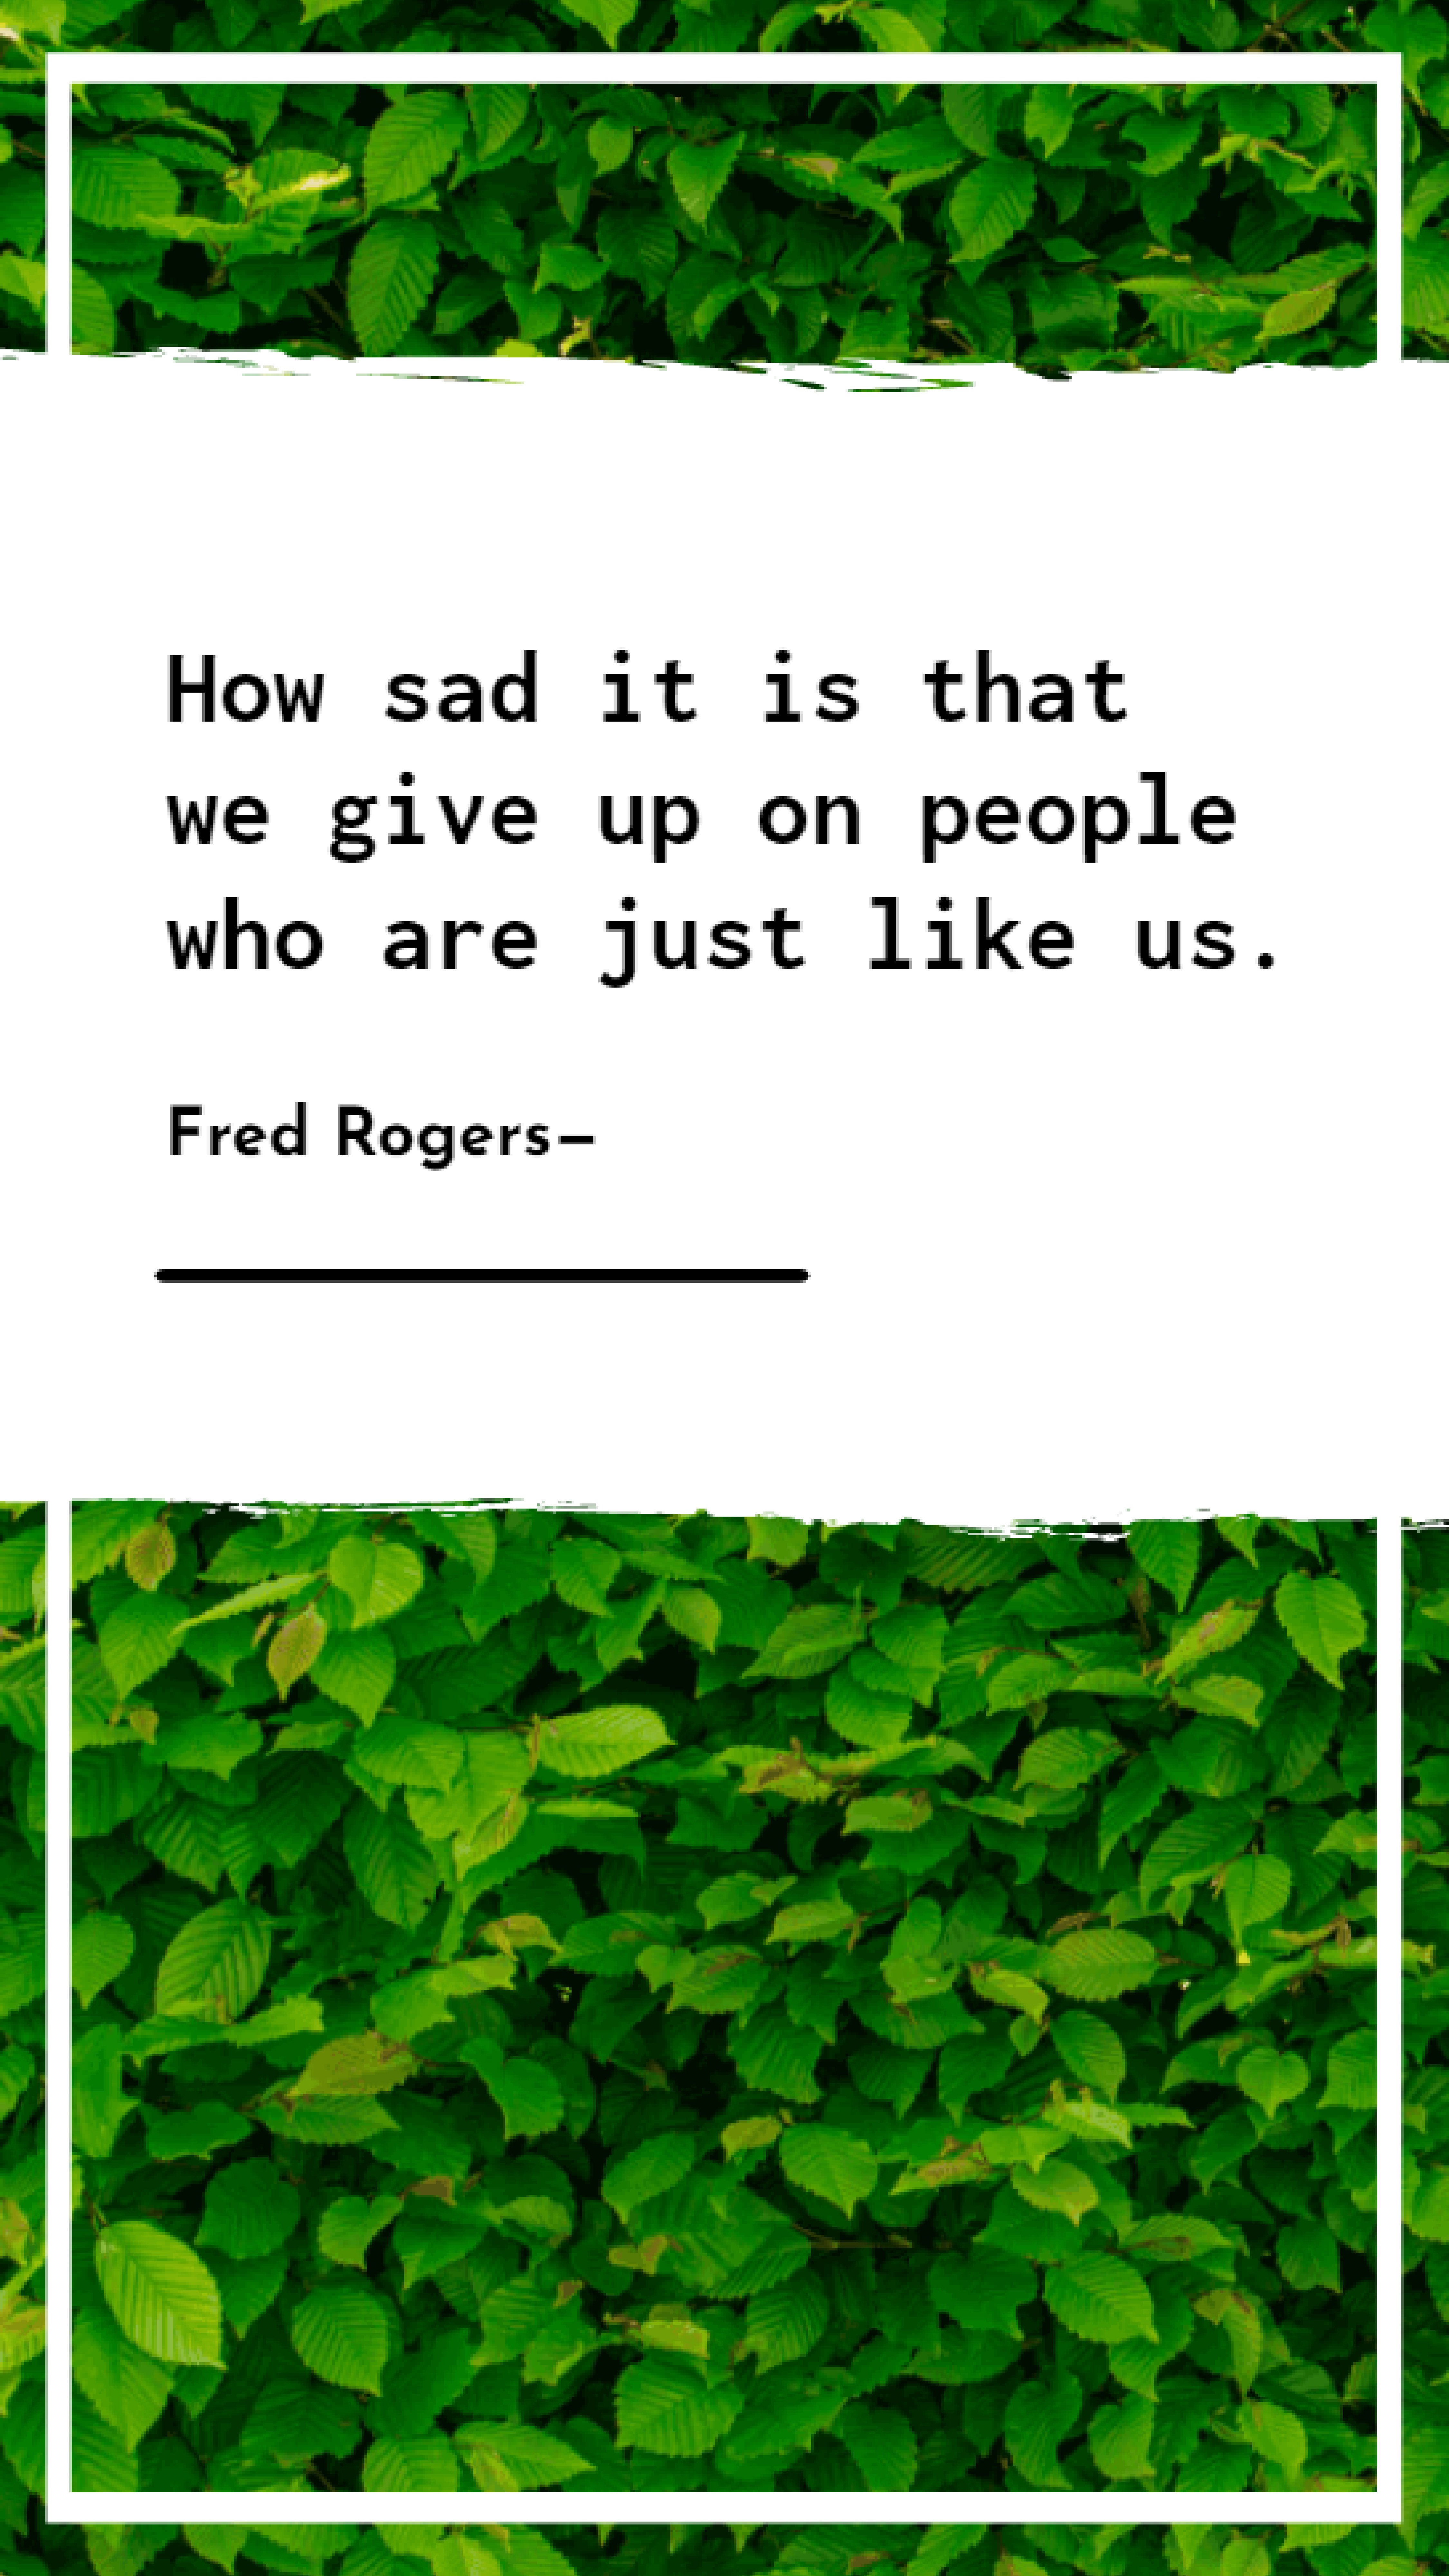 sad quotes giving up